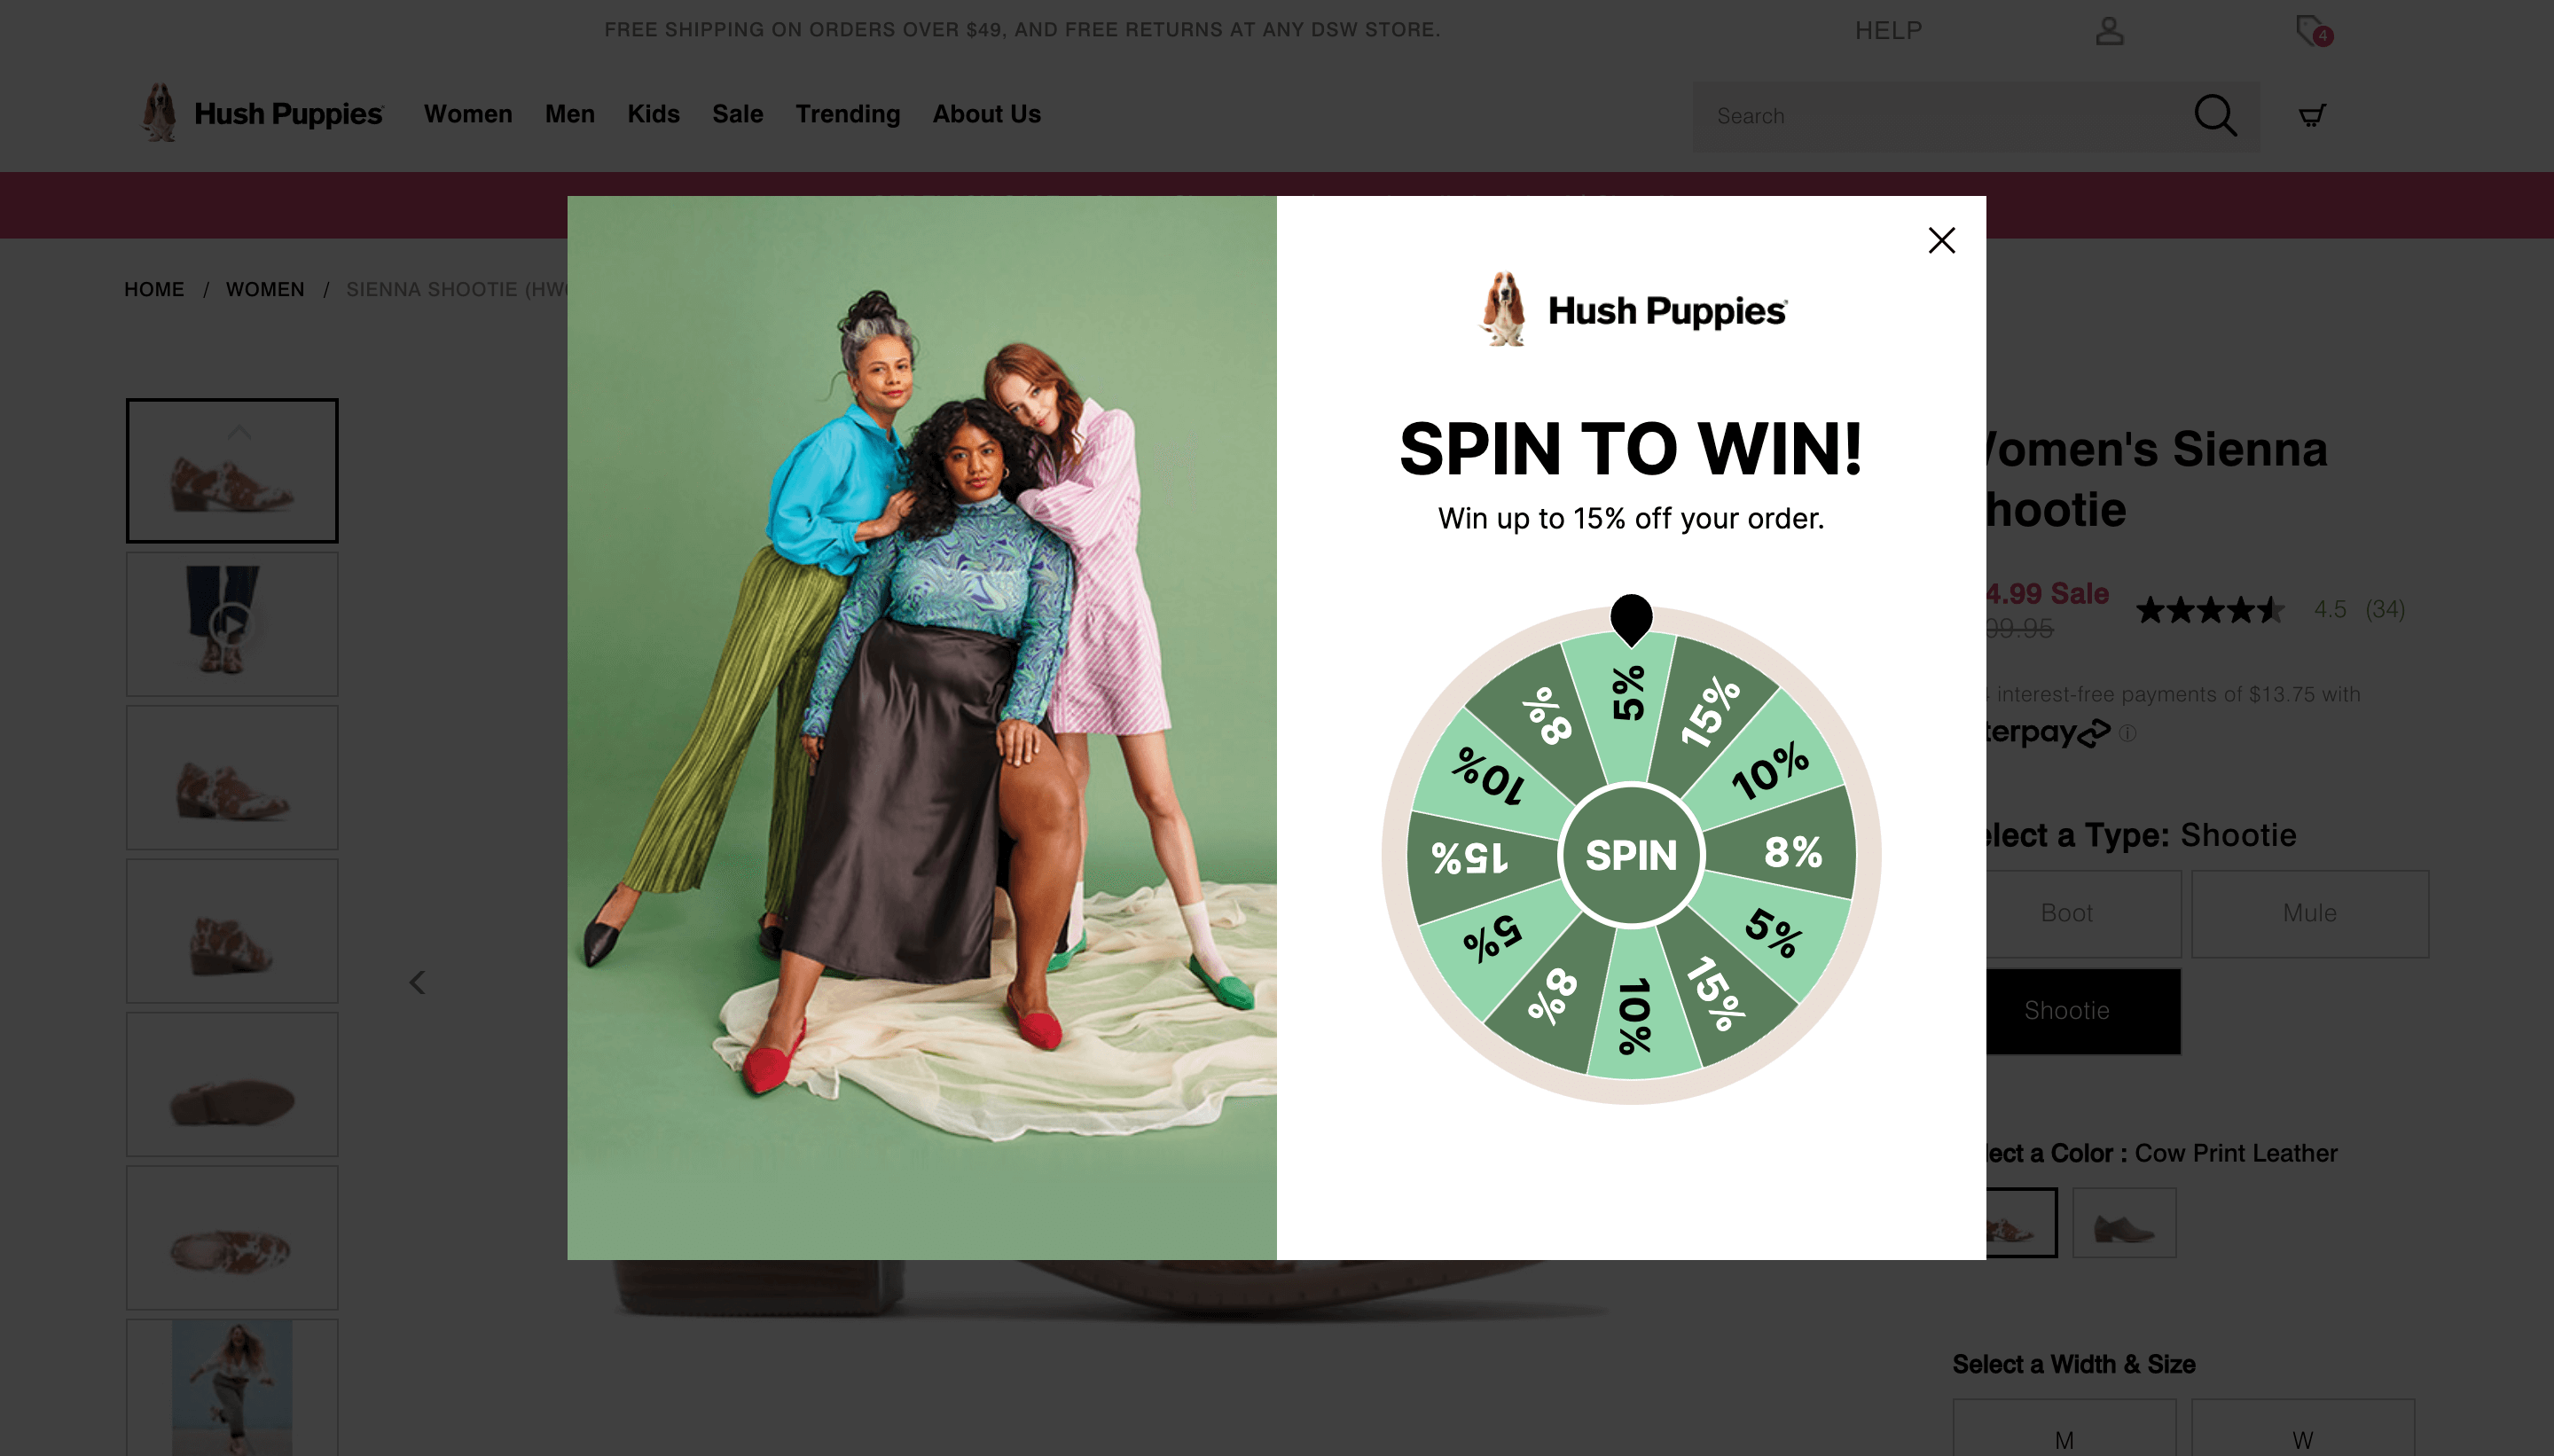 Hush Puppies Spin-to-Win